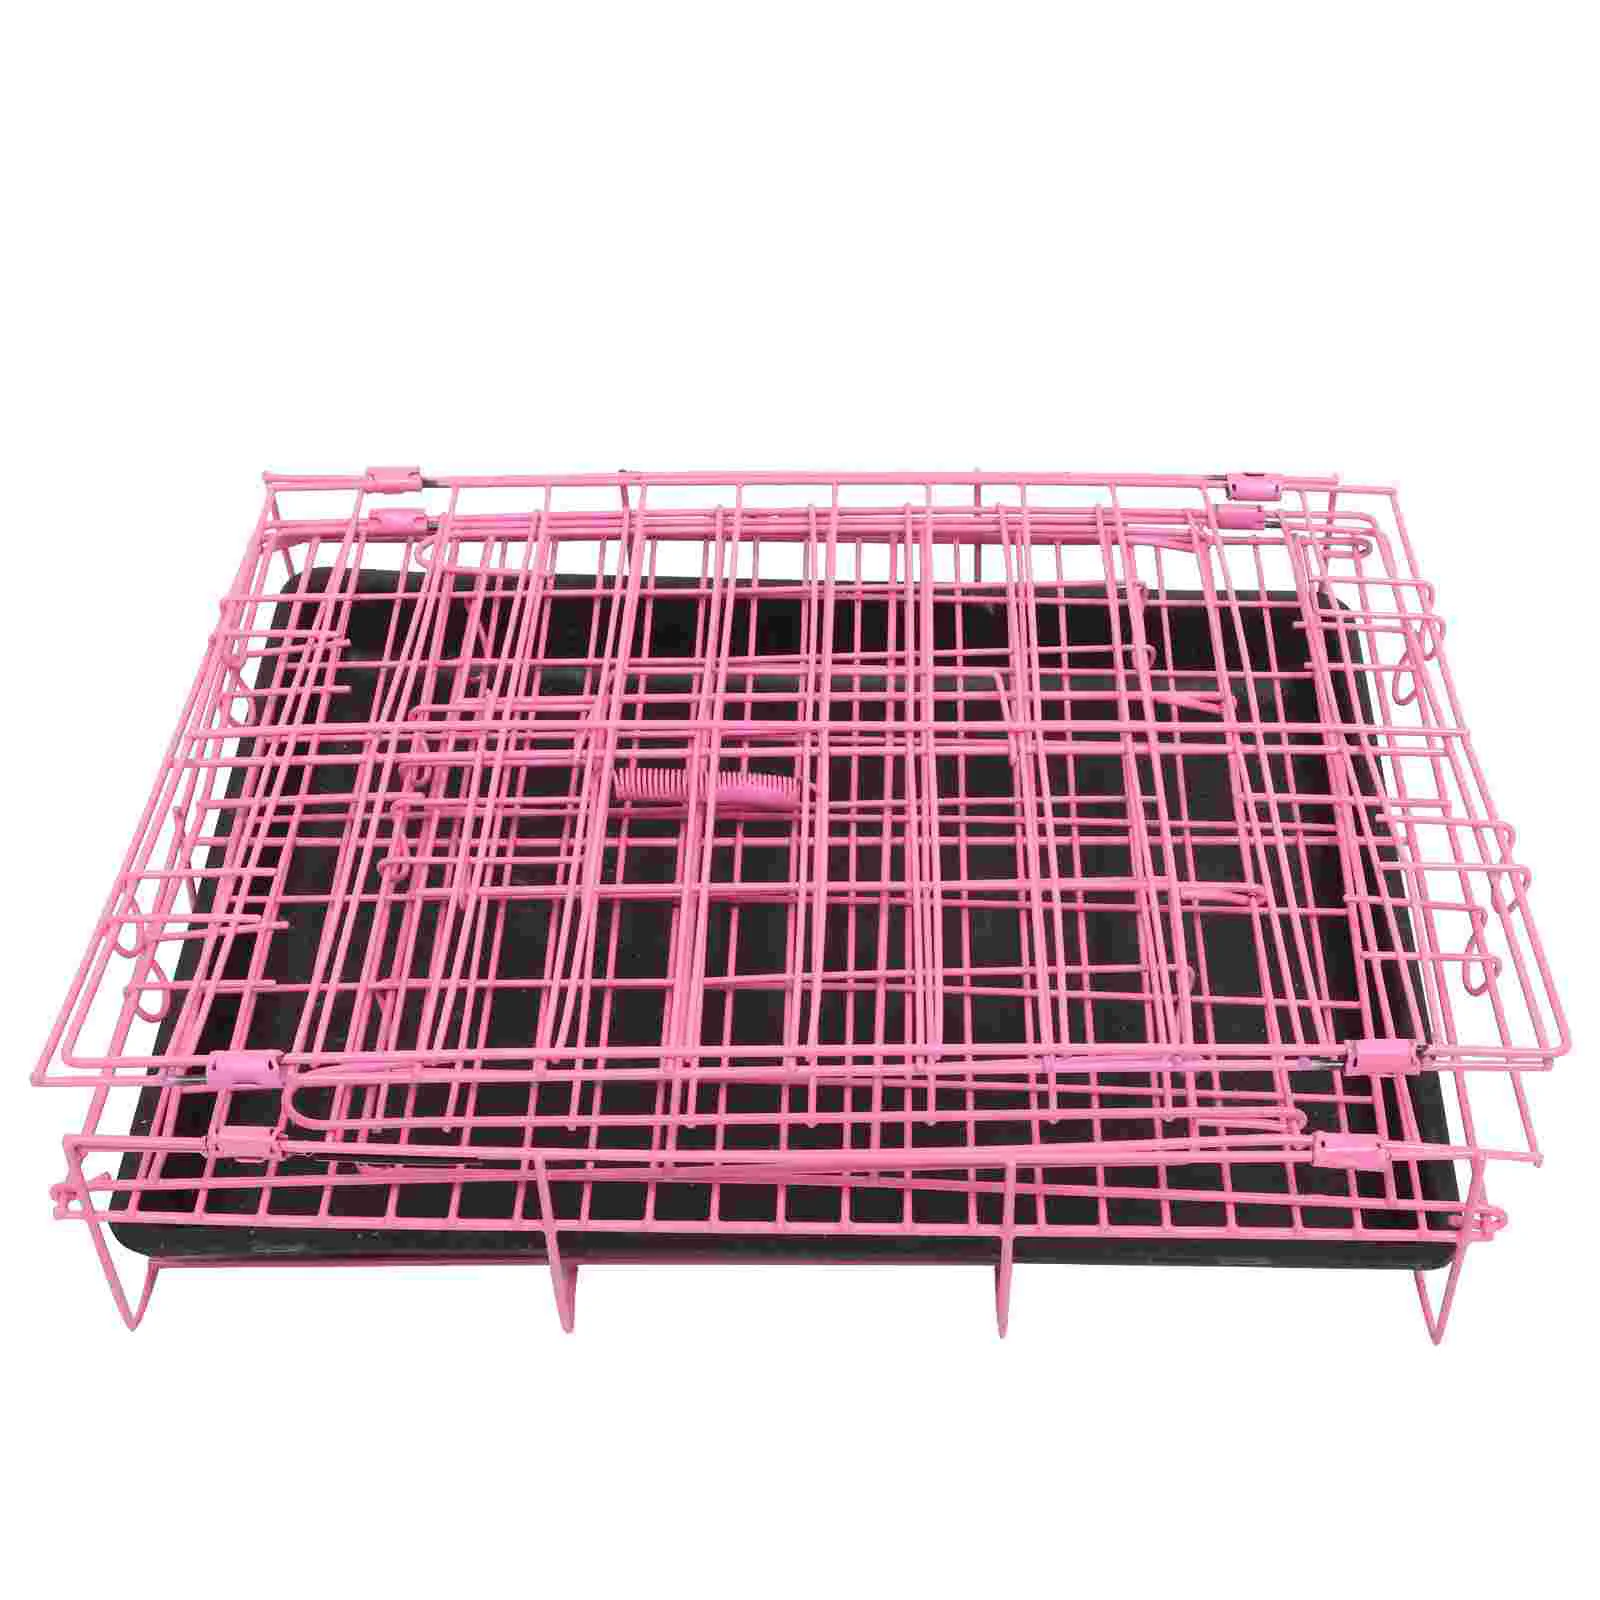 

Kennel Folding Cage, 1 Pc Pets Crate Folding Metal Crate Foldable Single Cage|35x26x34cm Dog For dogs